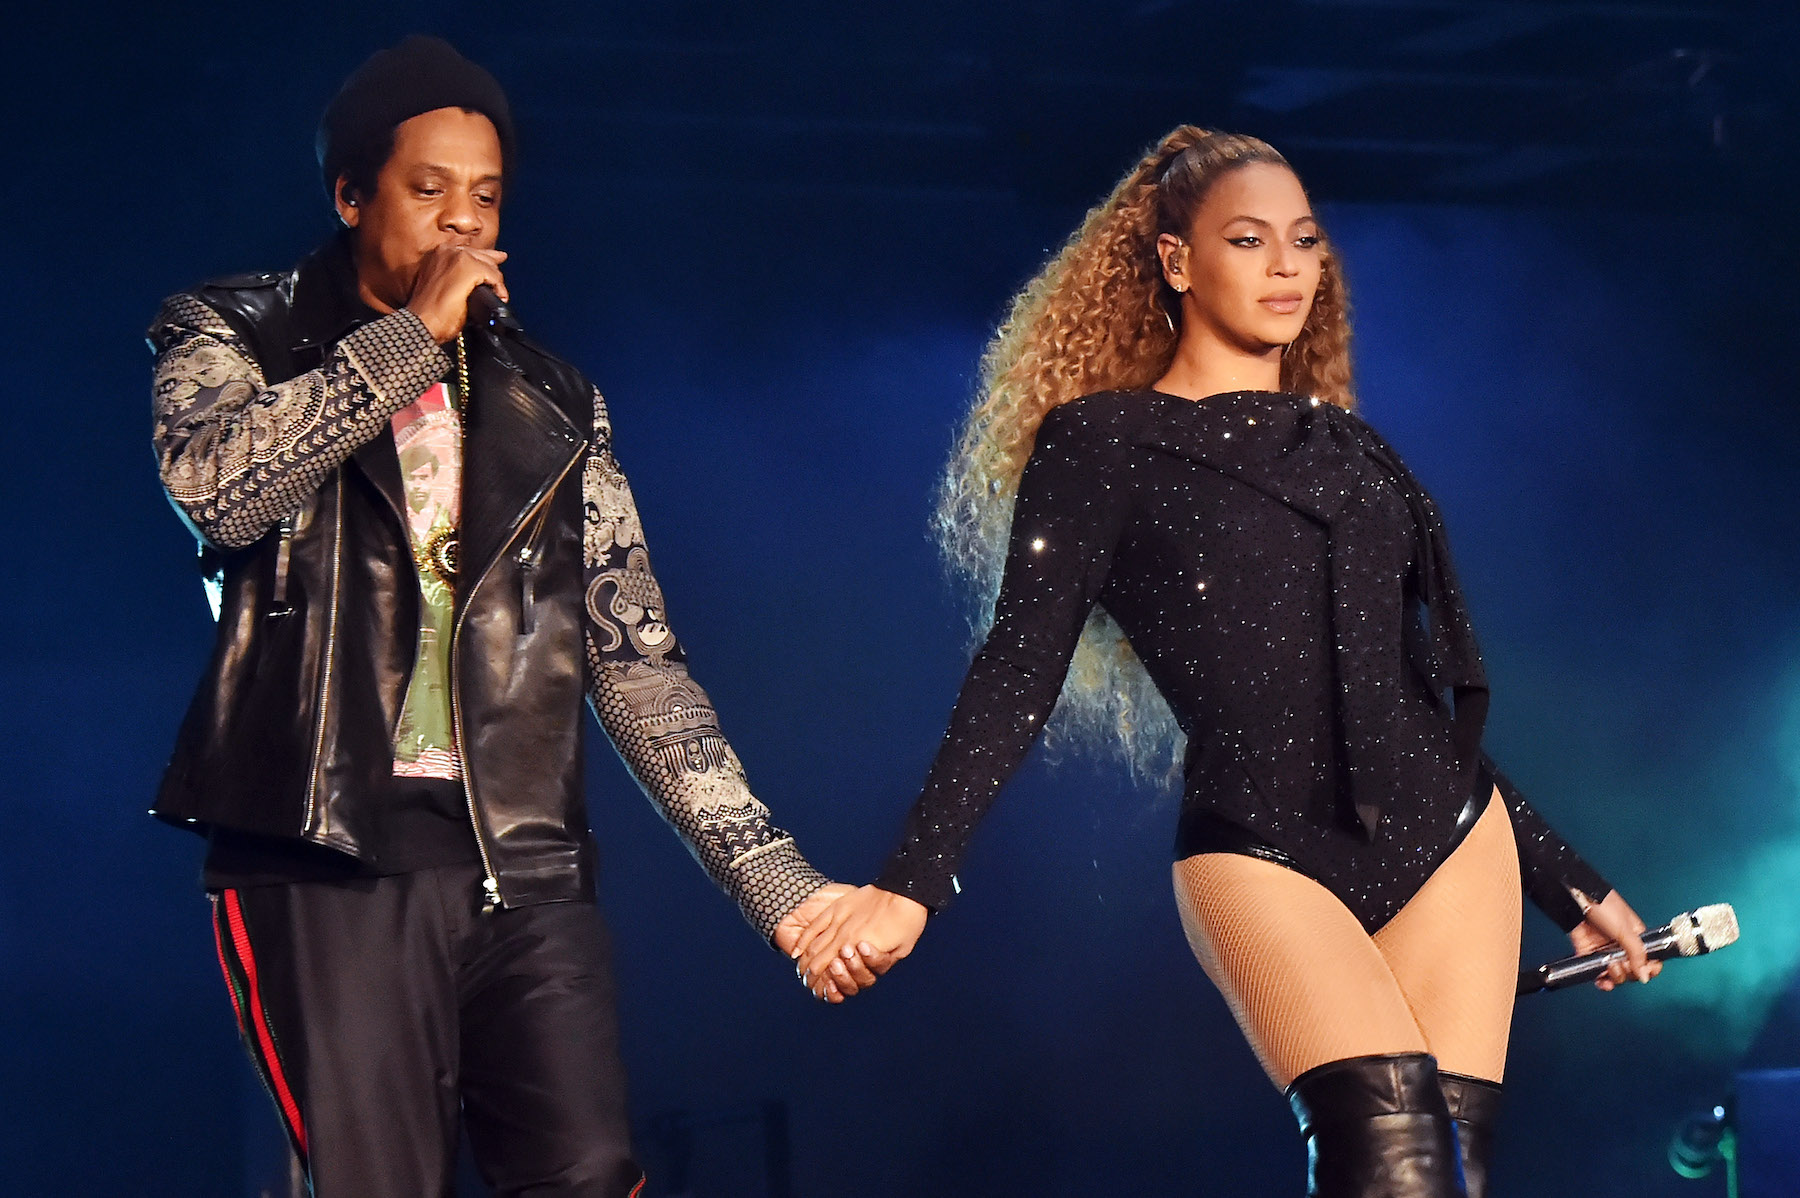 Jay-Z and Beyoncé, who had their wedding in 2008, on stage together in 2018